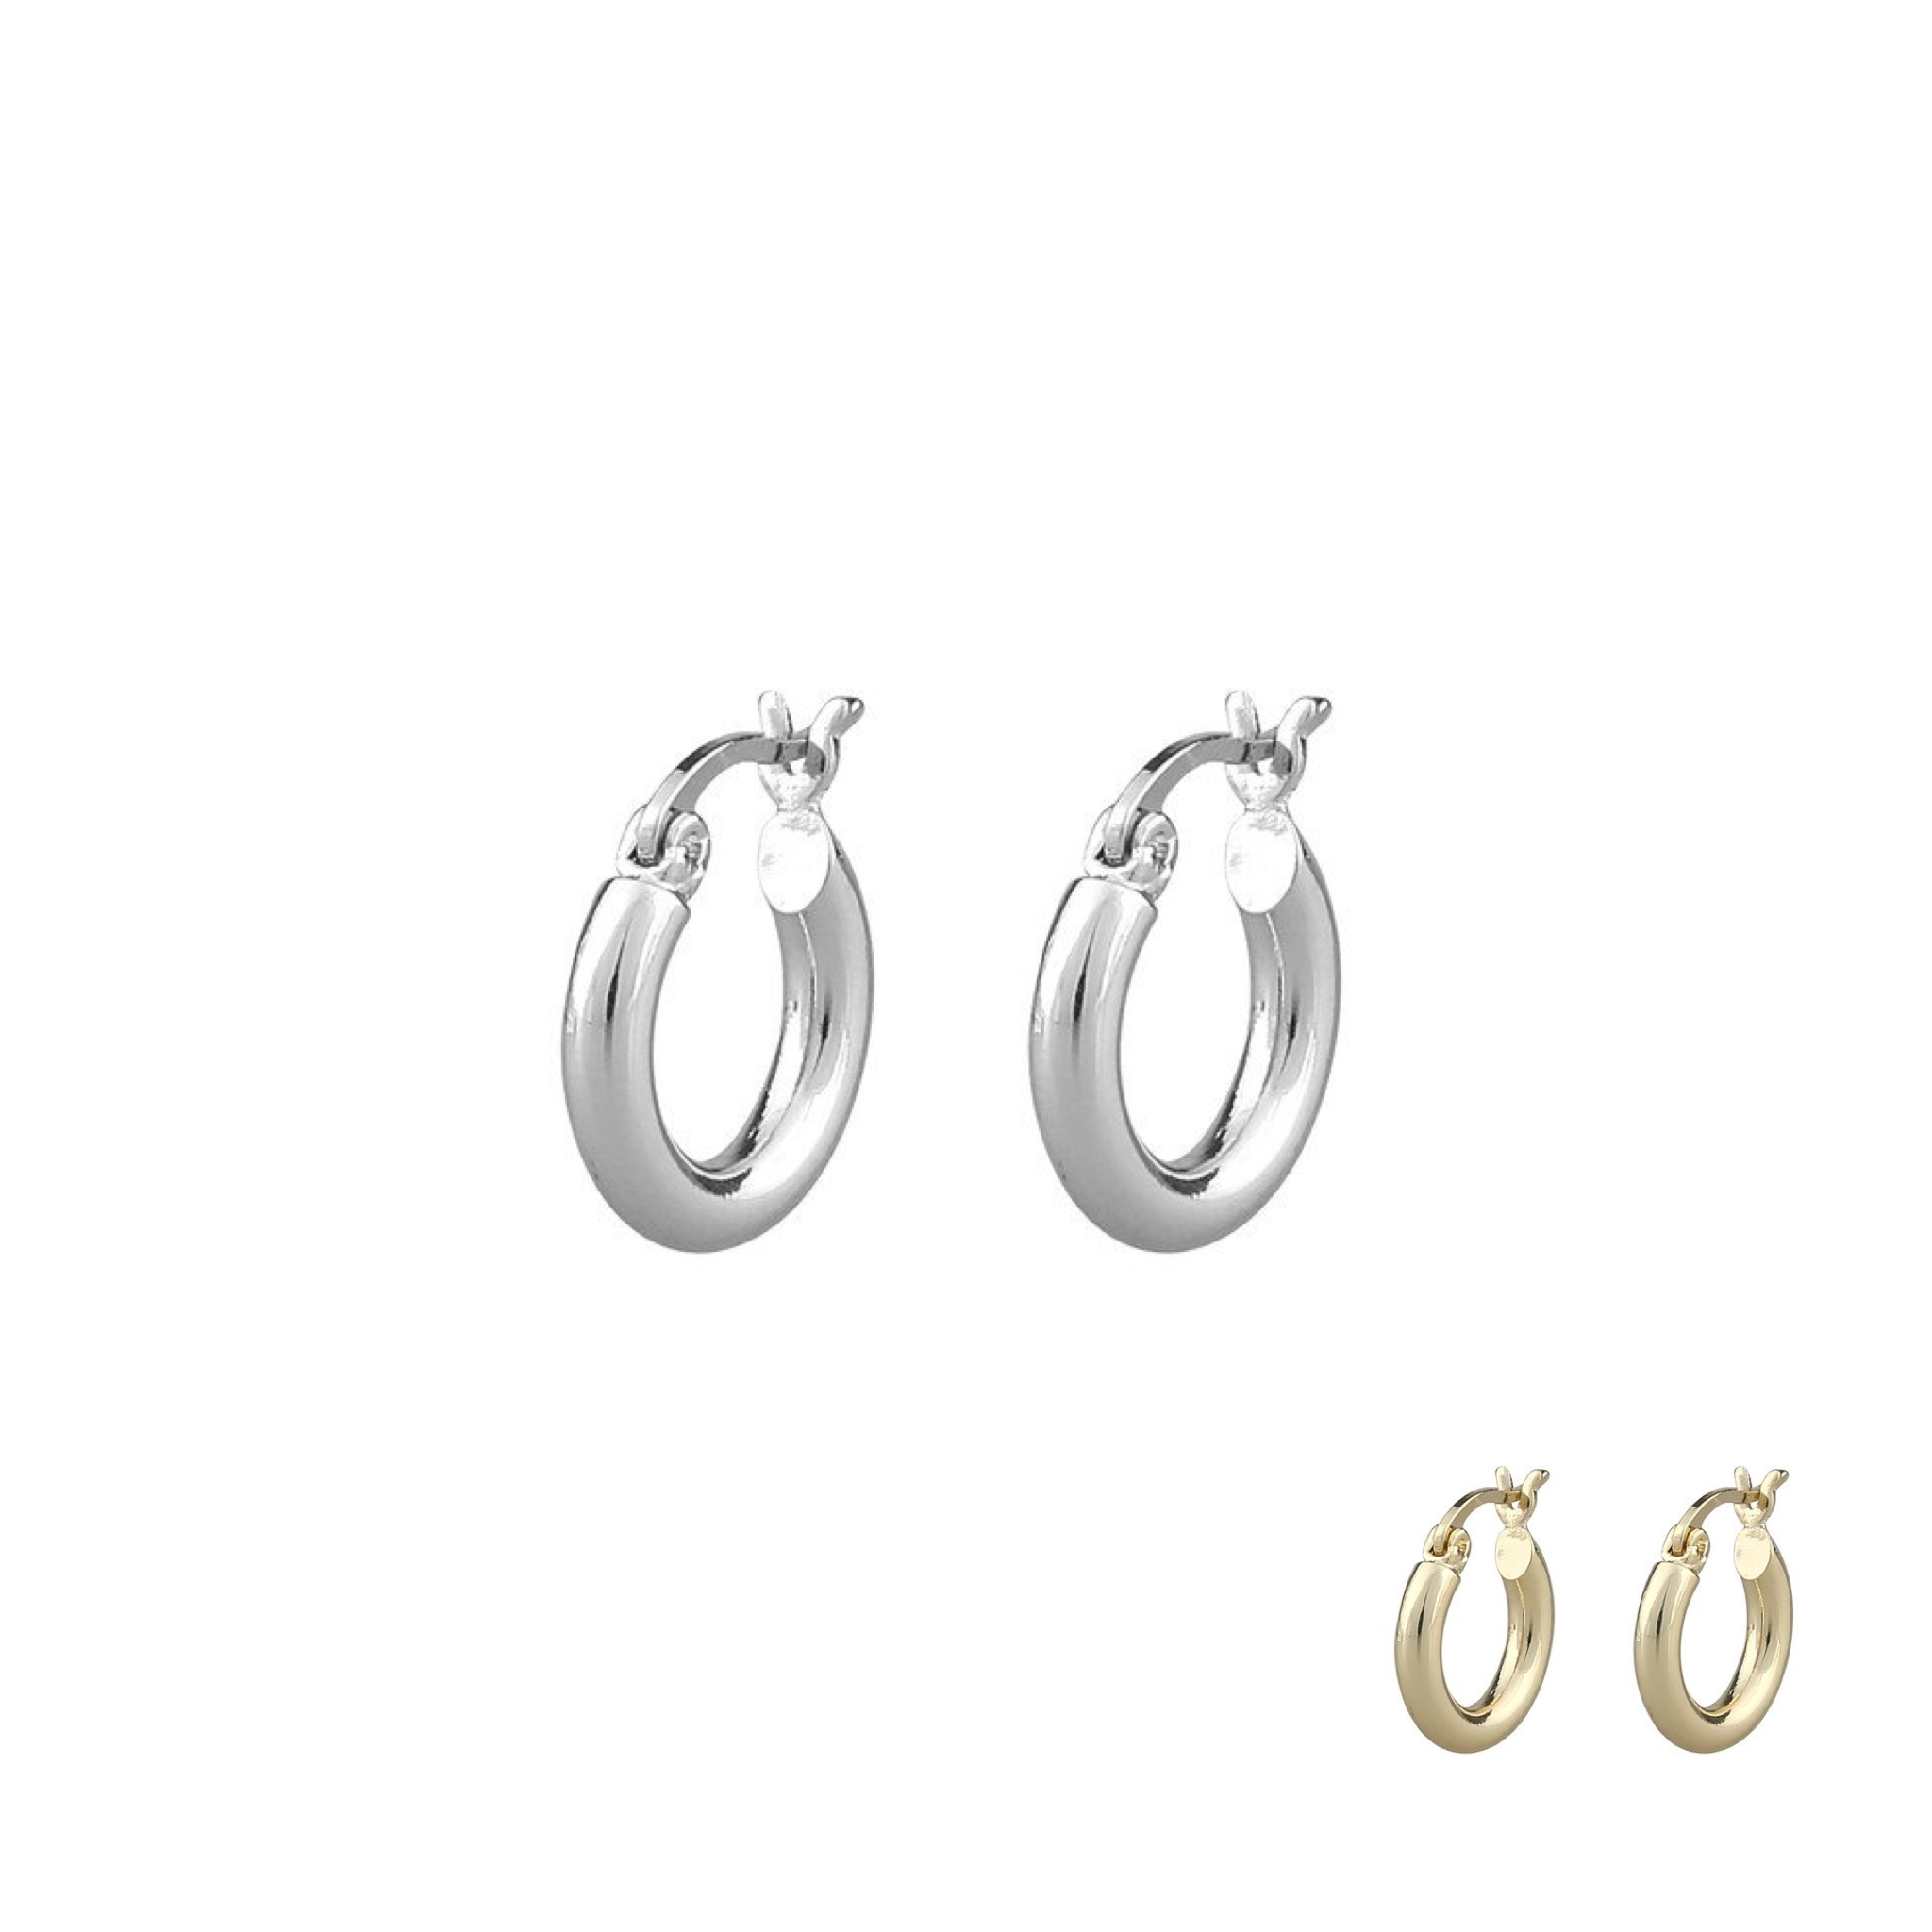 Minna Ring Earring Silver/ Gold